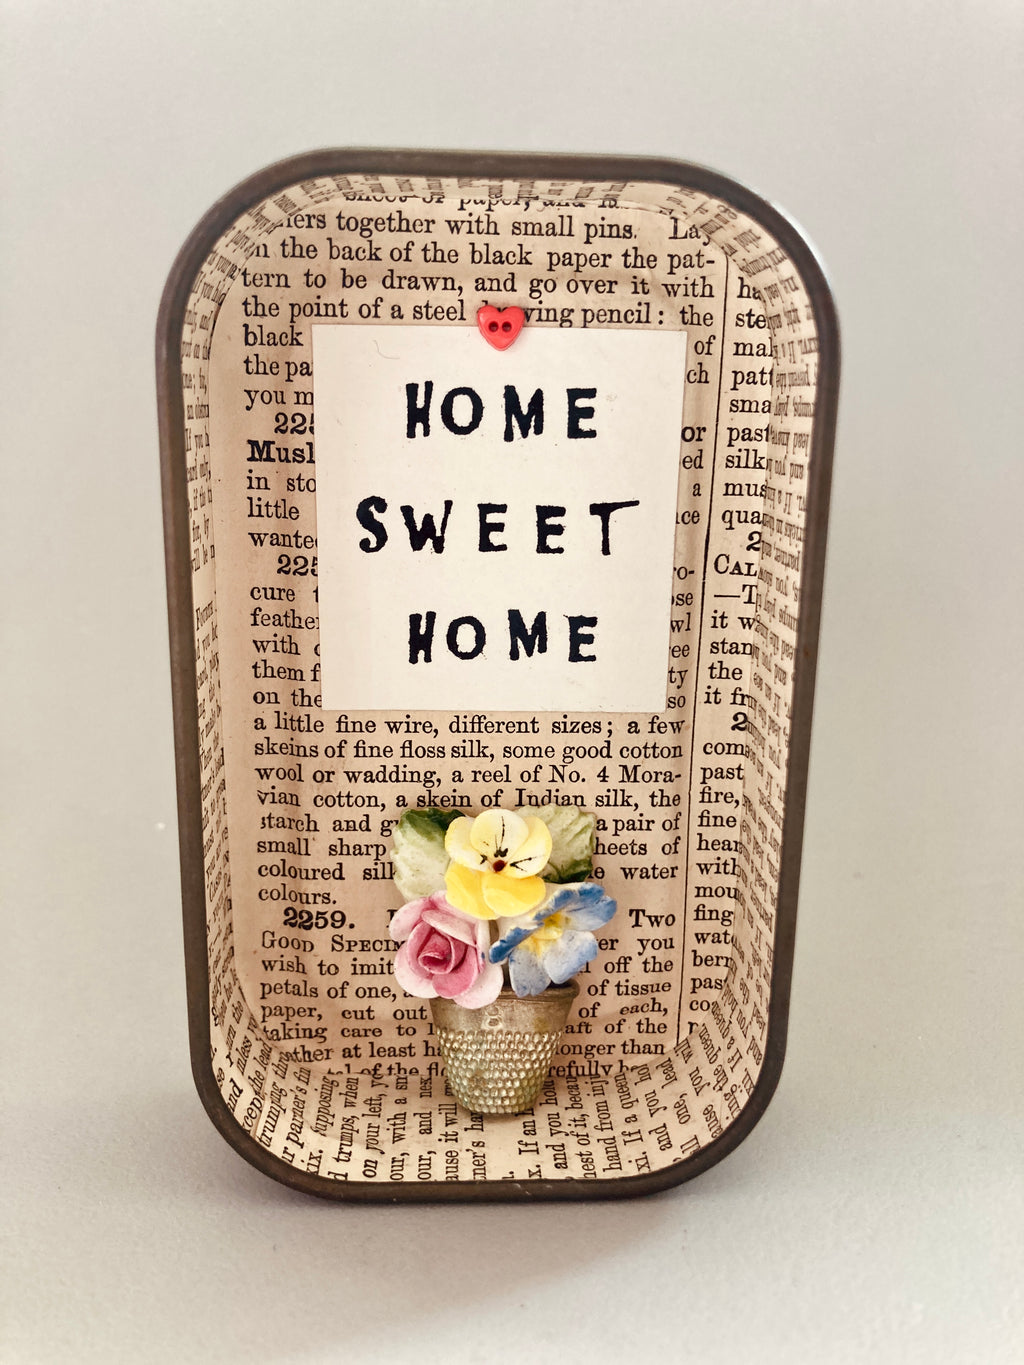 Home sweet home - small